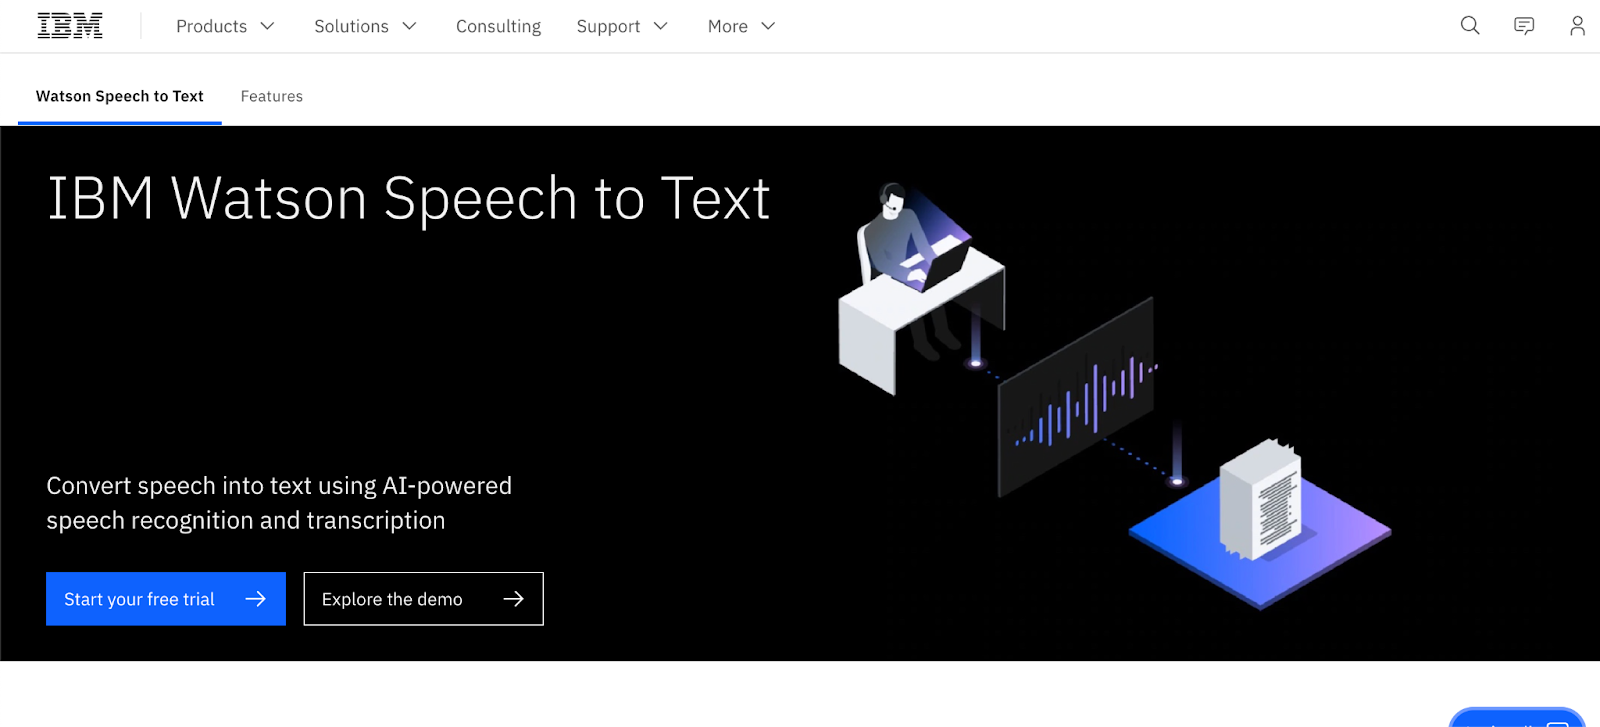 IBM Watson is great example of AI powered Speech Recognition as a Service